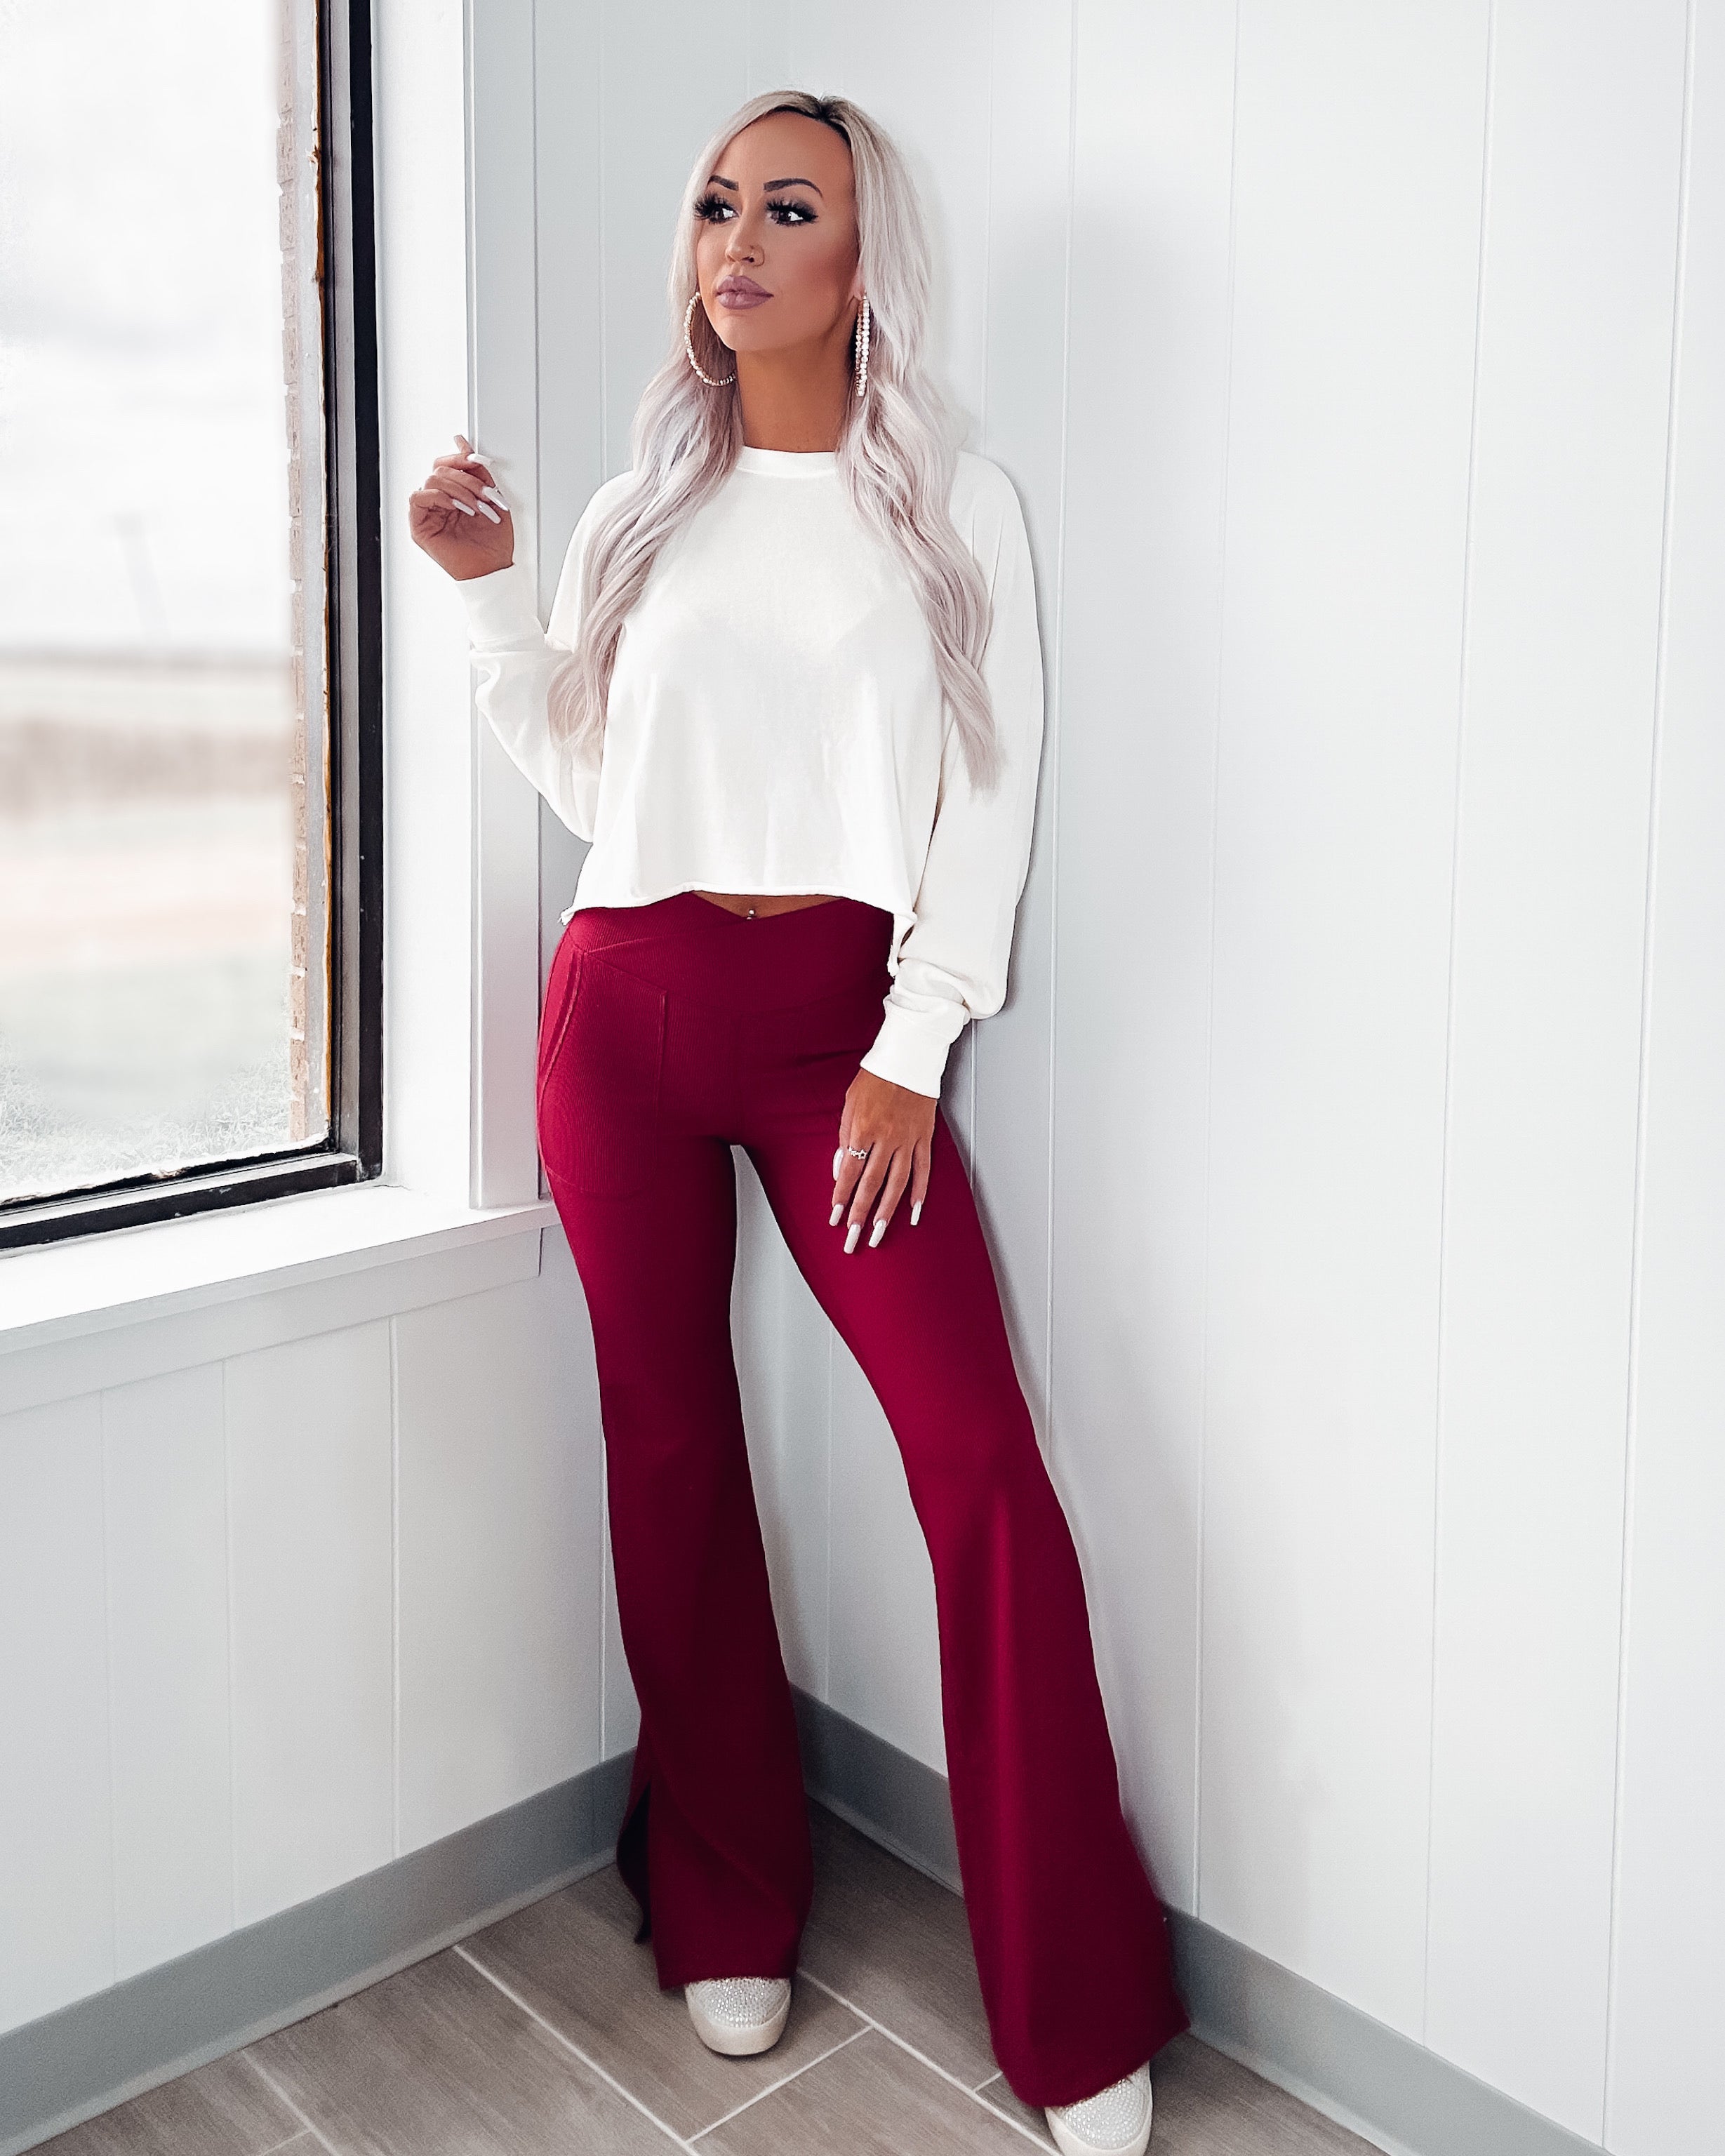 How to Style Flared Leggings - Midsize Style  Flared leggings outfit, Flared  leggings, Flare leggings outfit